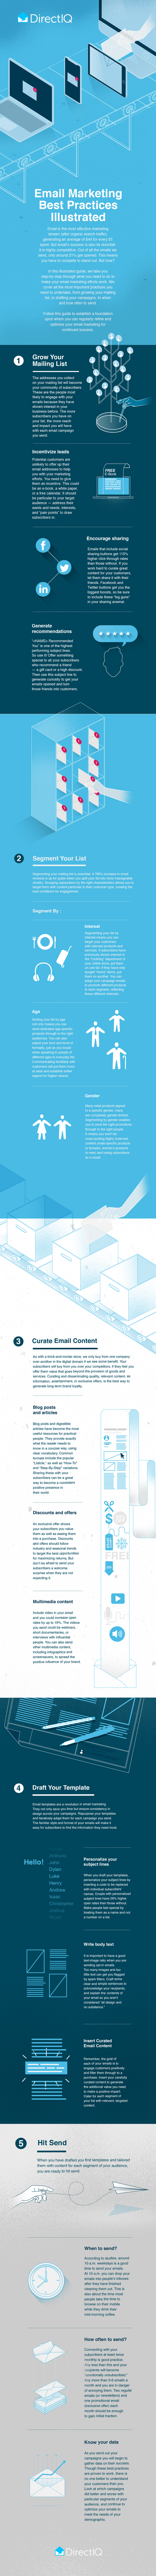 Email-Marketing-Best-Practices-Illustrated